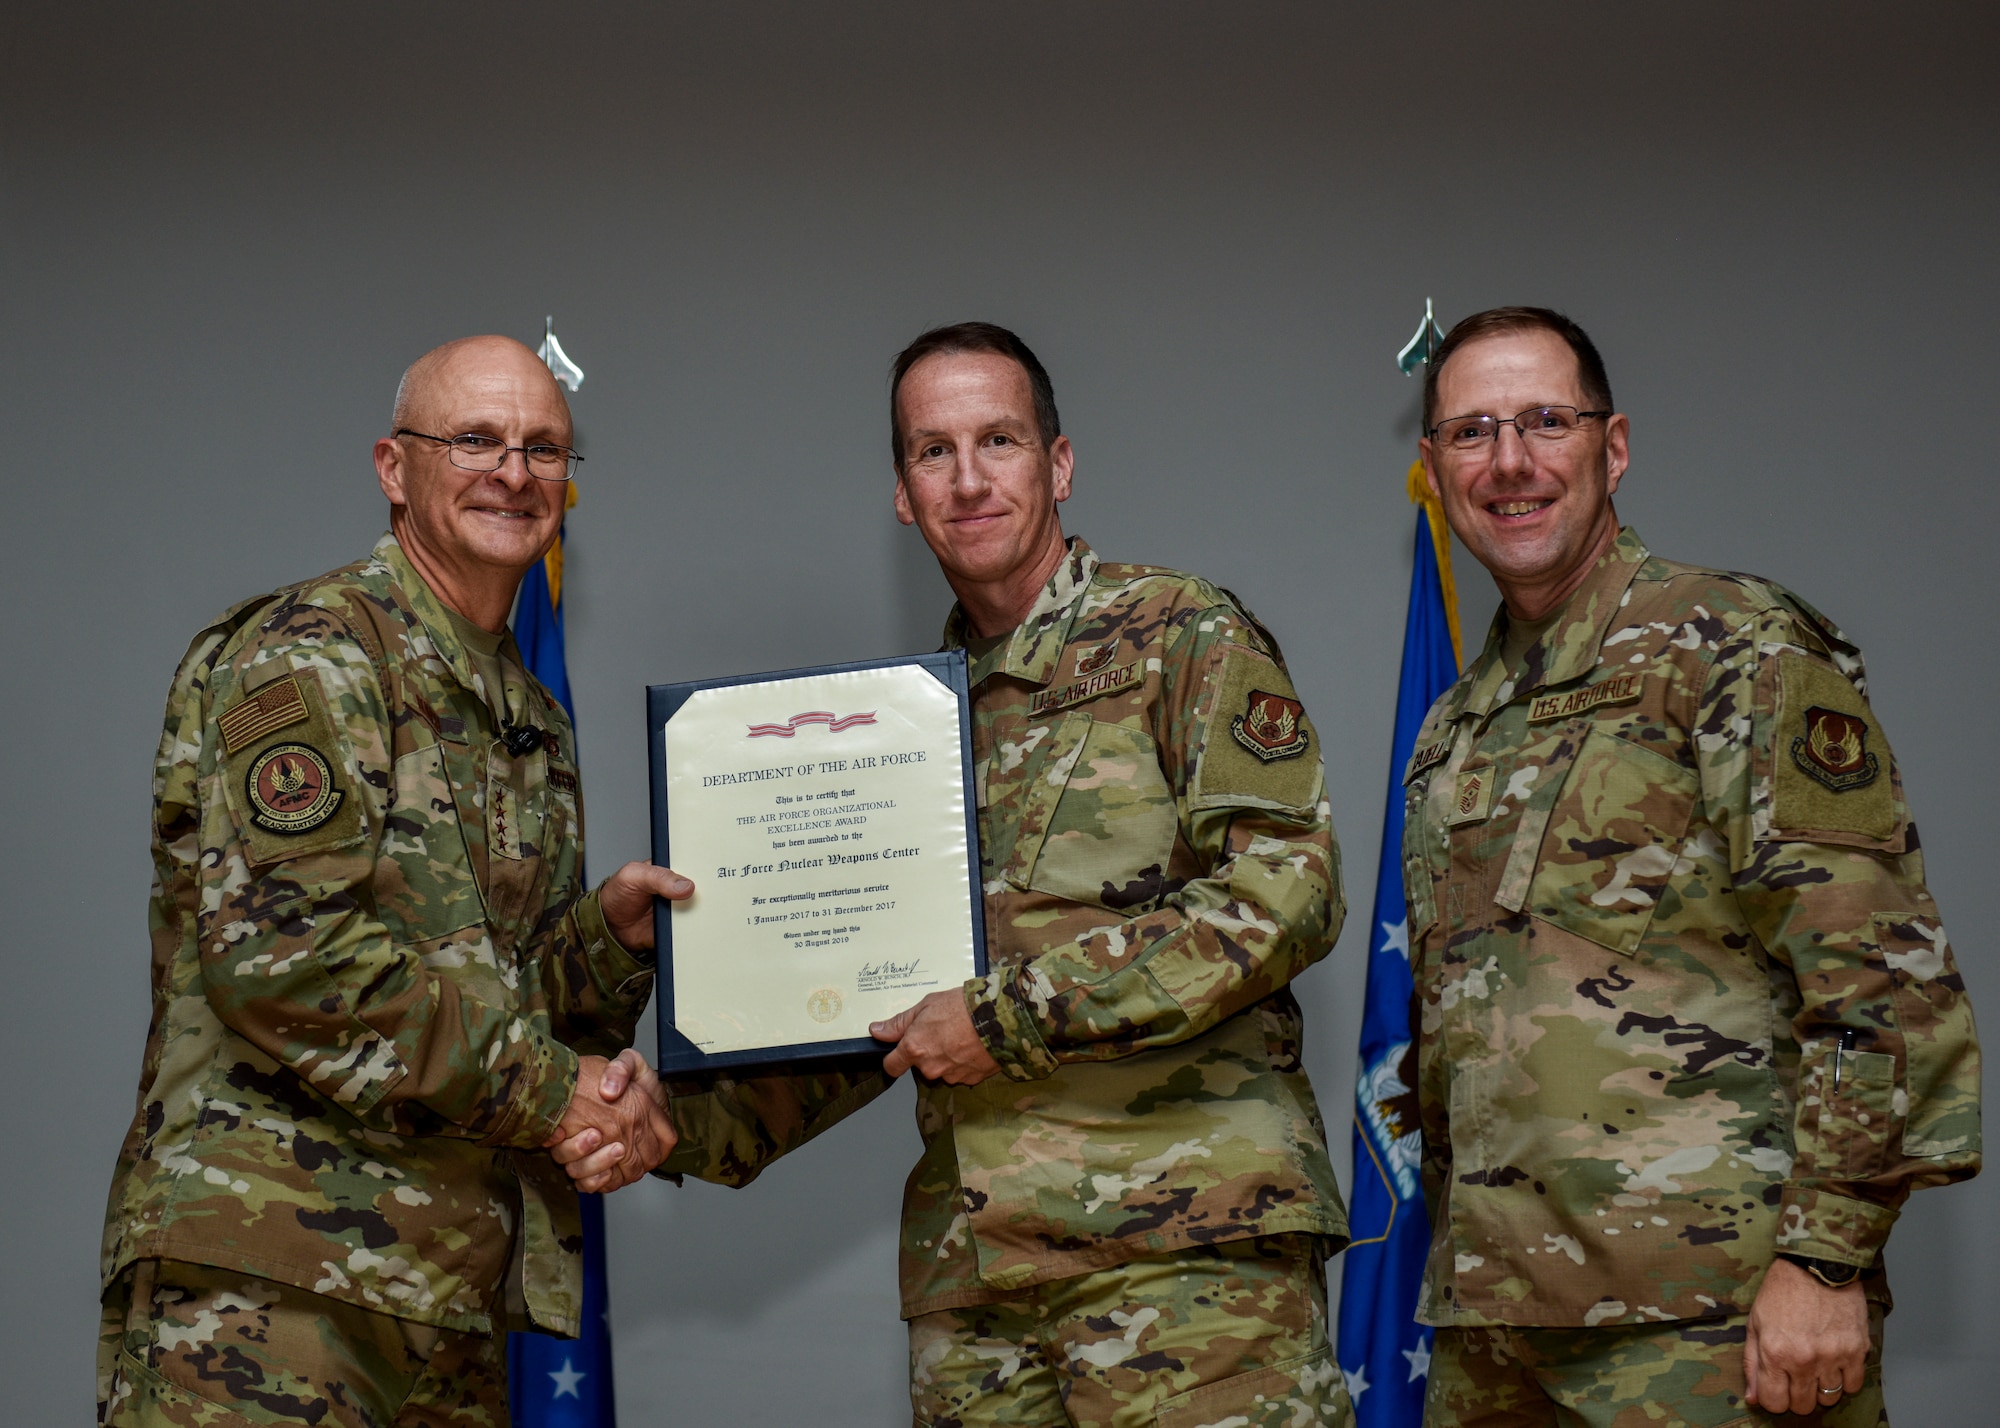 Air Force Materiel Command’s commander, Gen. Arnold W. Bunch, Jr., (left), shakes hands with Maj. Gen. Shaun Q. Morris, Air Force Nuclear Weapons Center commander, as he presents him with the center’s sixth Air Force Organizational Excellence award on Sept. 11, 2019, at Kirtland AFB, New Mexico. Chief Master Sgt. Stanley Cadell (right), AFMC command chief, also congratulated the center for its accomplishment. The 2018 award is for the 2017 calendar year, which marks the ninth consecutive year the center has received the award since its inception in March 2006. (U.S. Air Force photo by Airman 1st Class Austin J. Prisbrey)